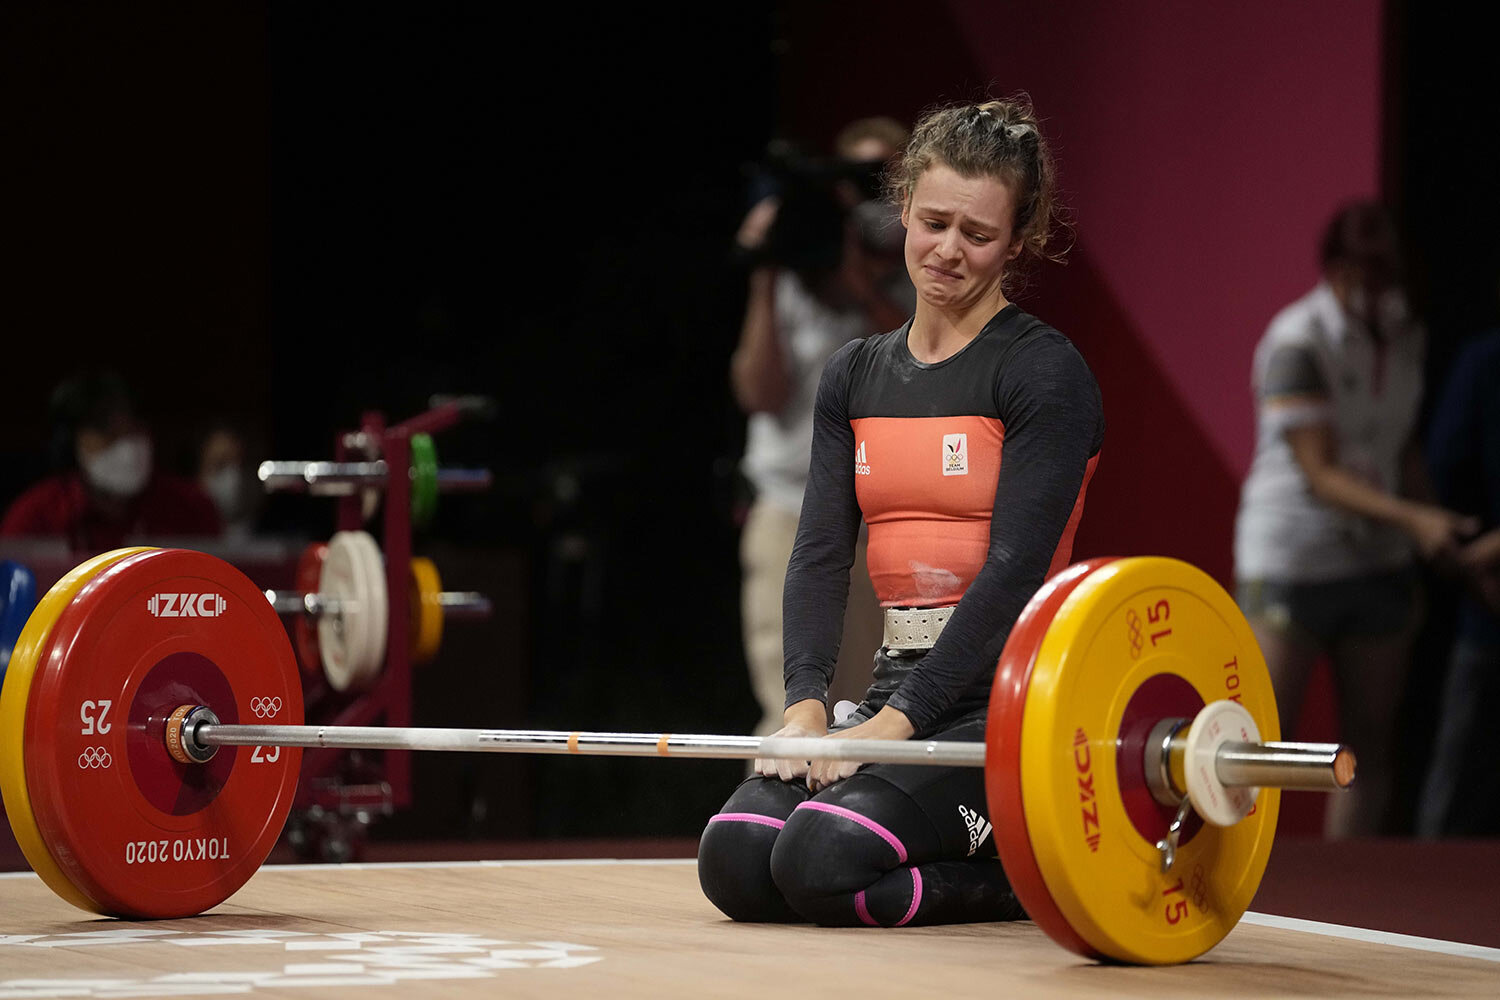  Nina Sterckx of Belgium weeps after an unsuccessful attempt as she competes in the women's 49kg weightlifting event, at the 2020 Summer Olympics, Saturday, July 24, 2021, in Tokyo, Japan. (AP Photo/Luca Bruno) 